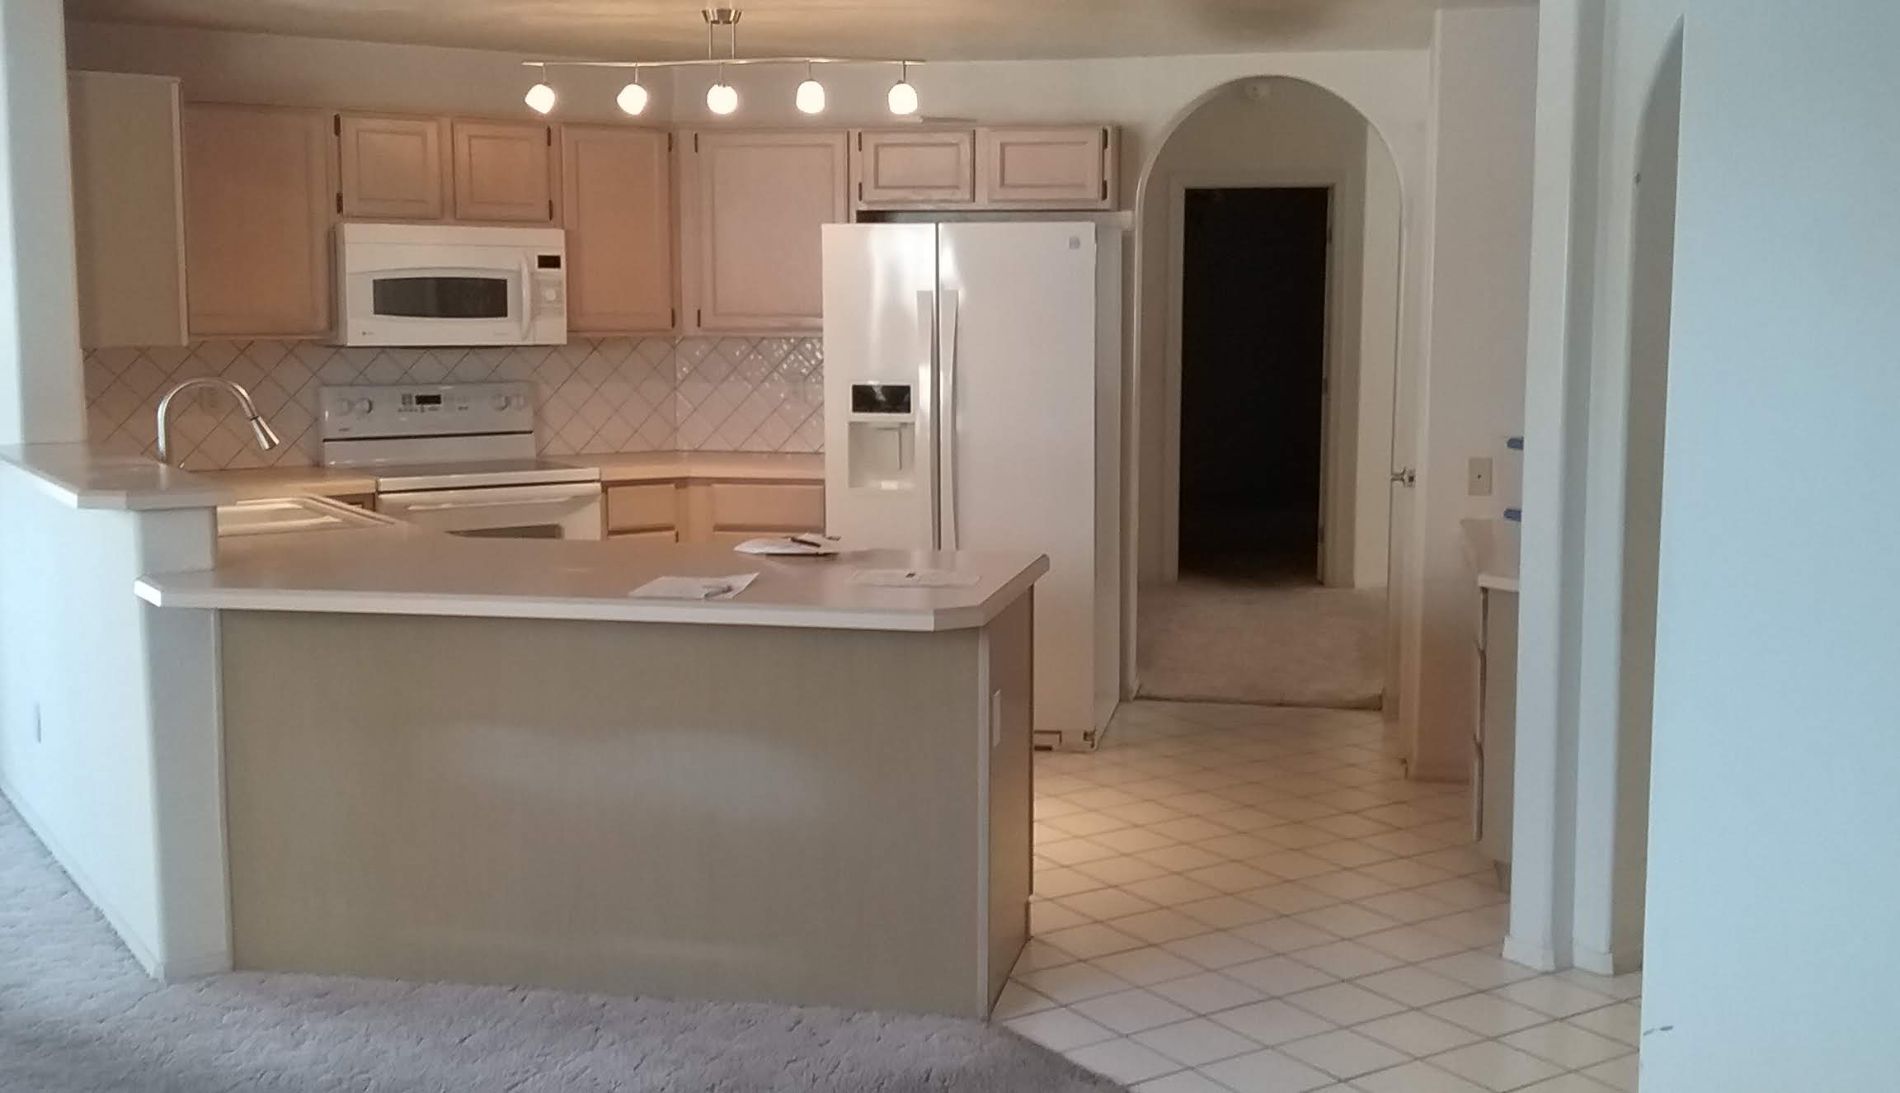 Light-colored kitchen before renovation